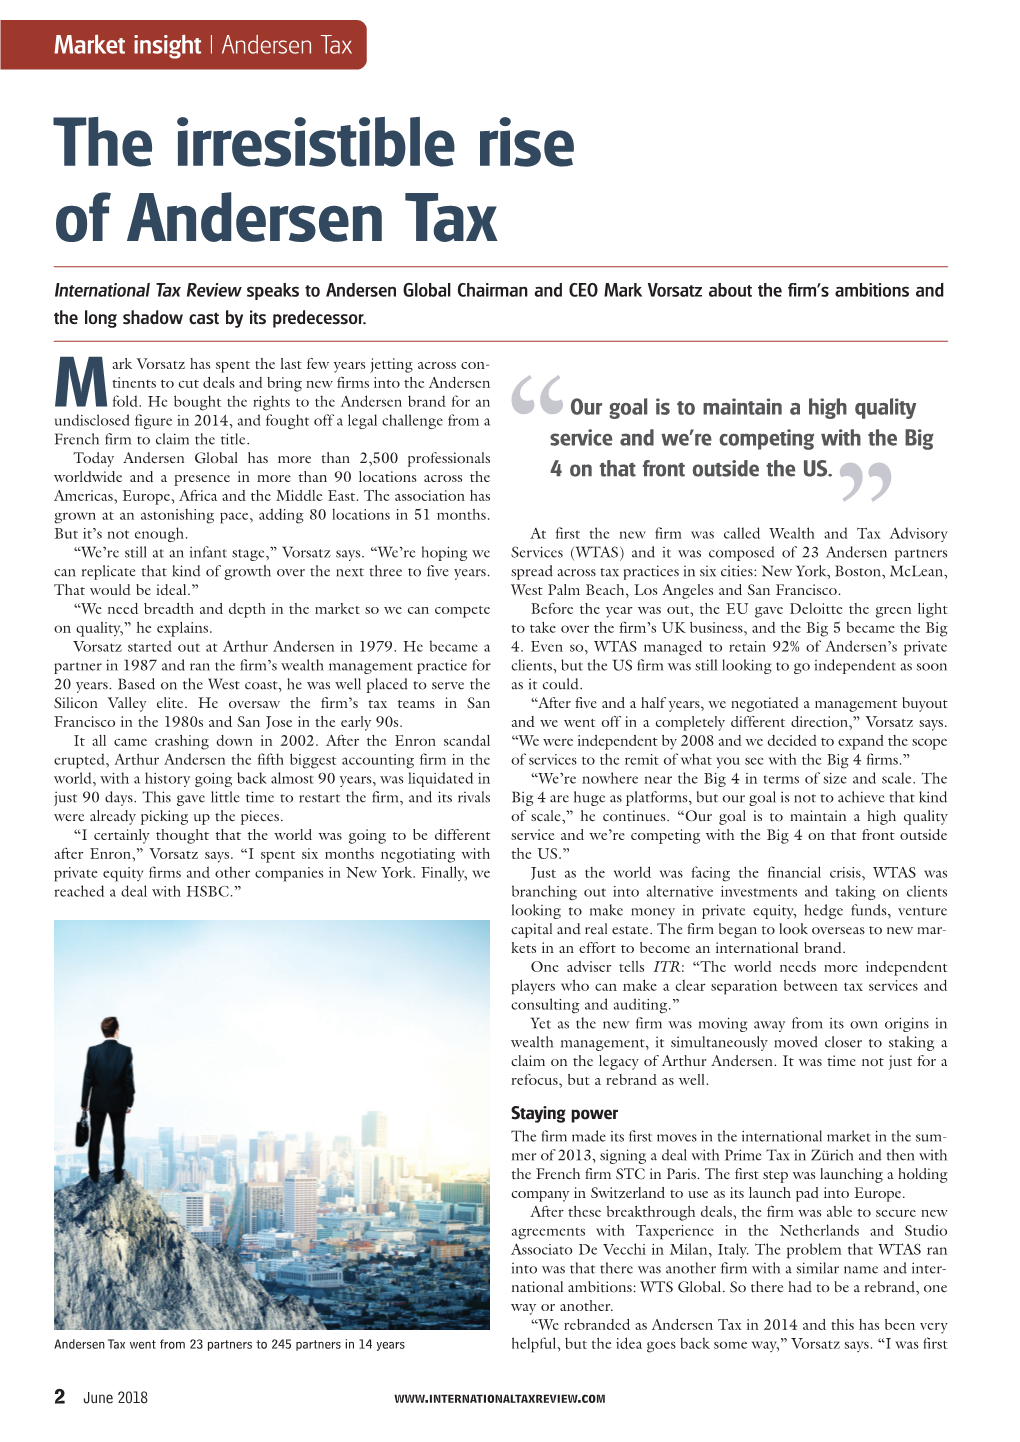 The Irresistible Rise of Andersen Tax